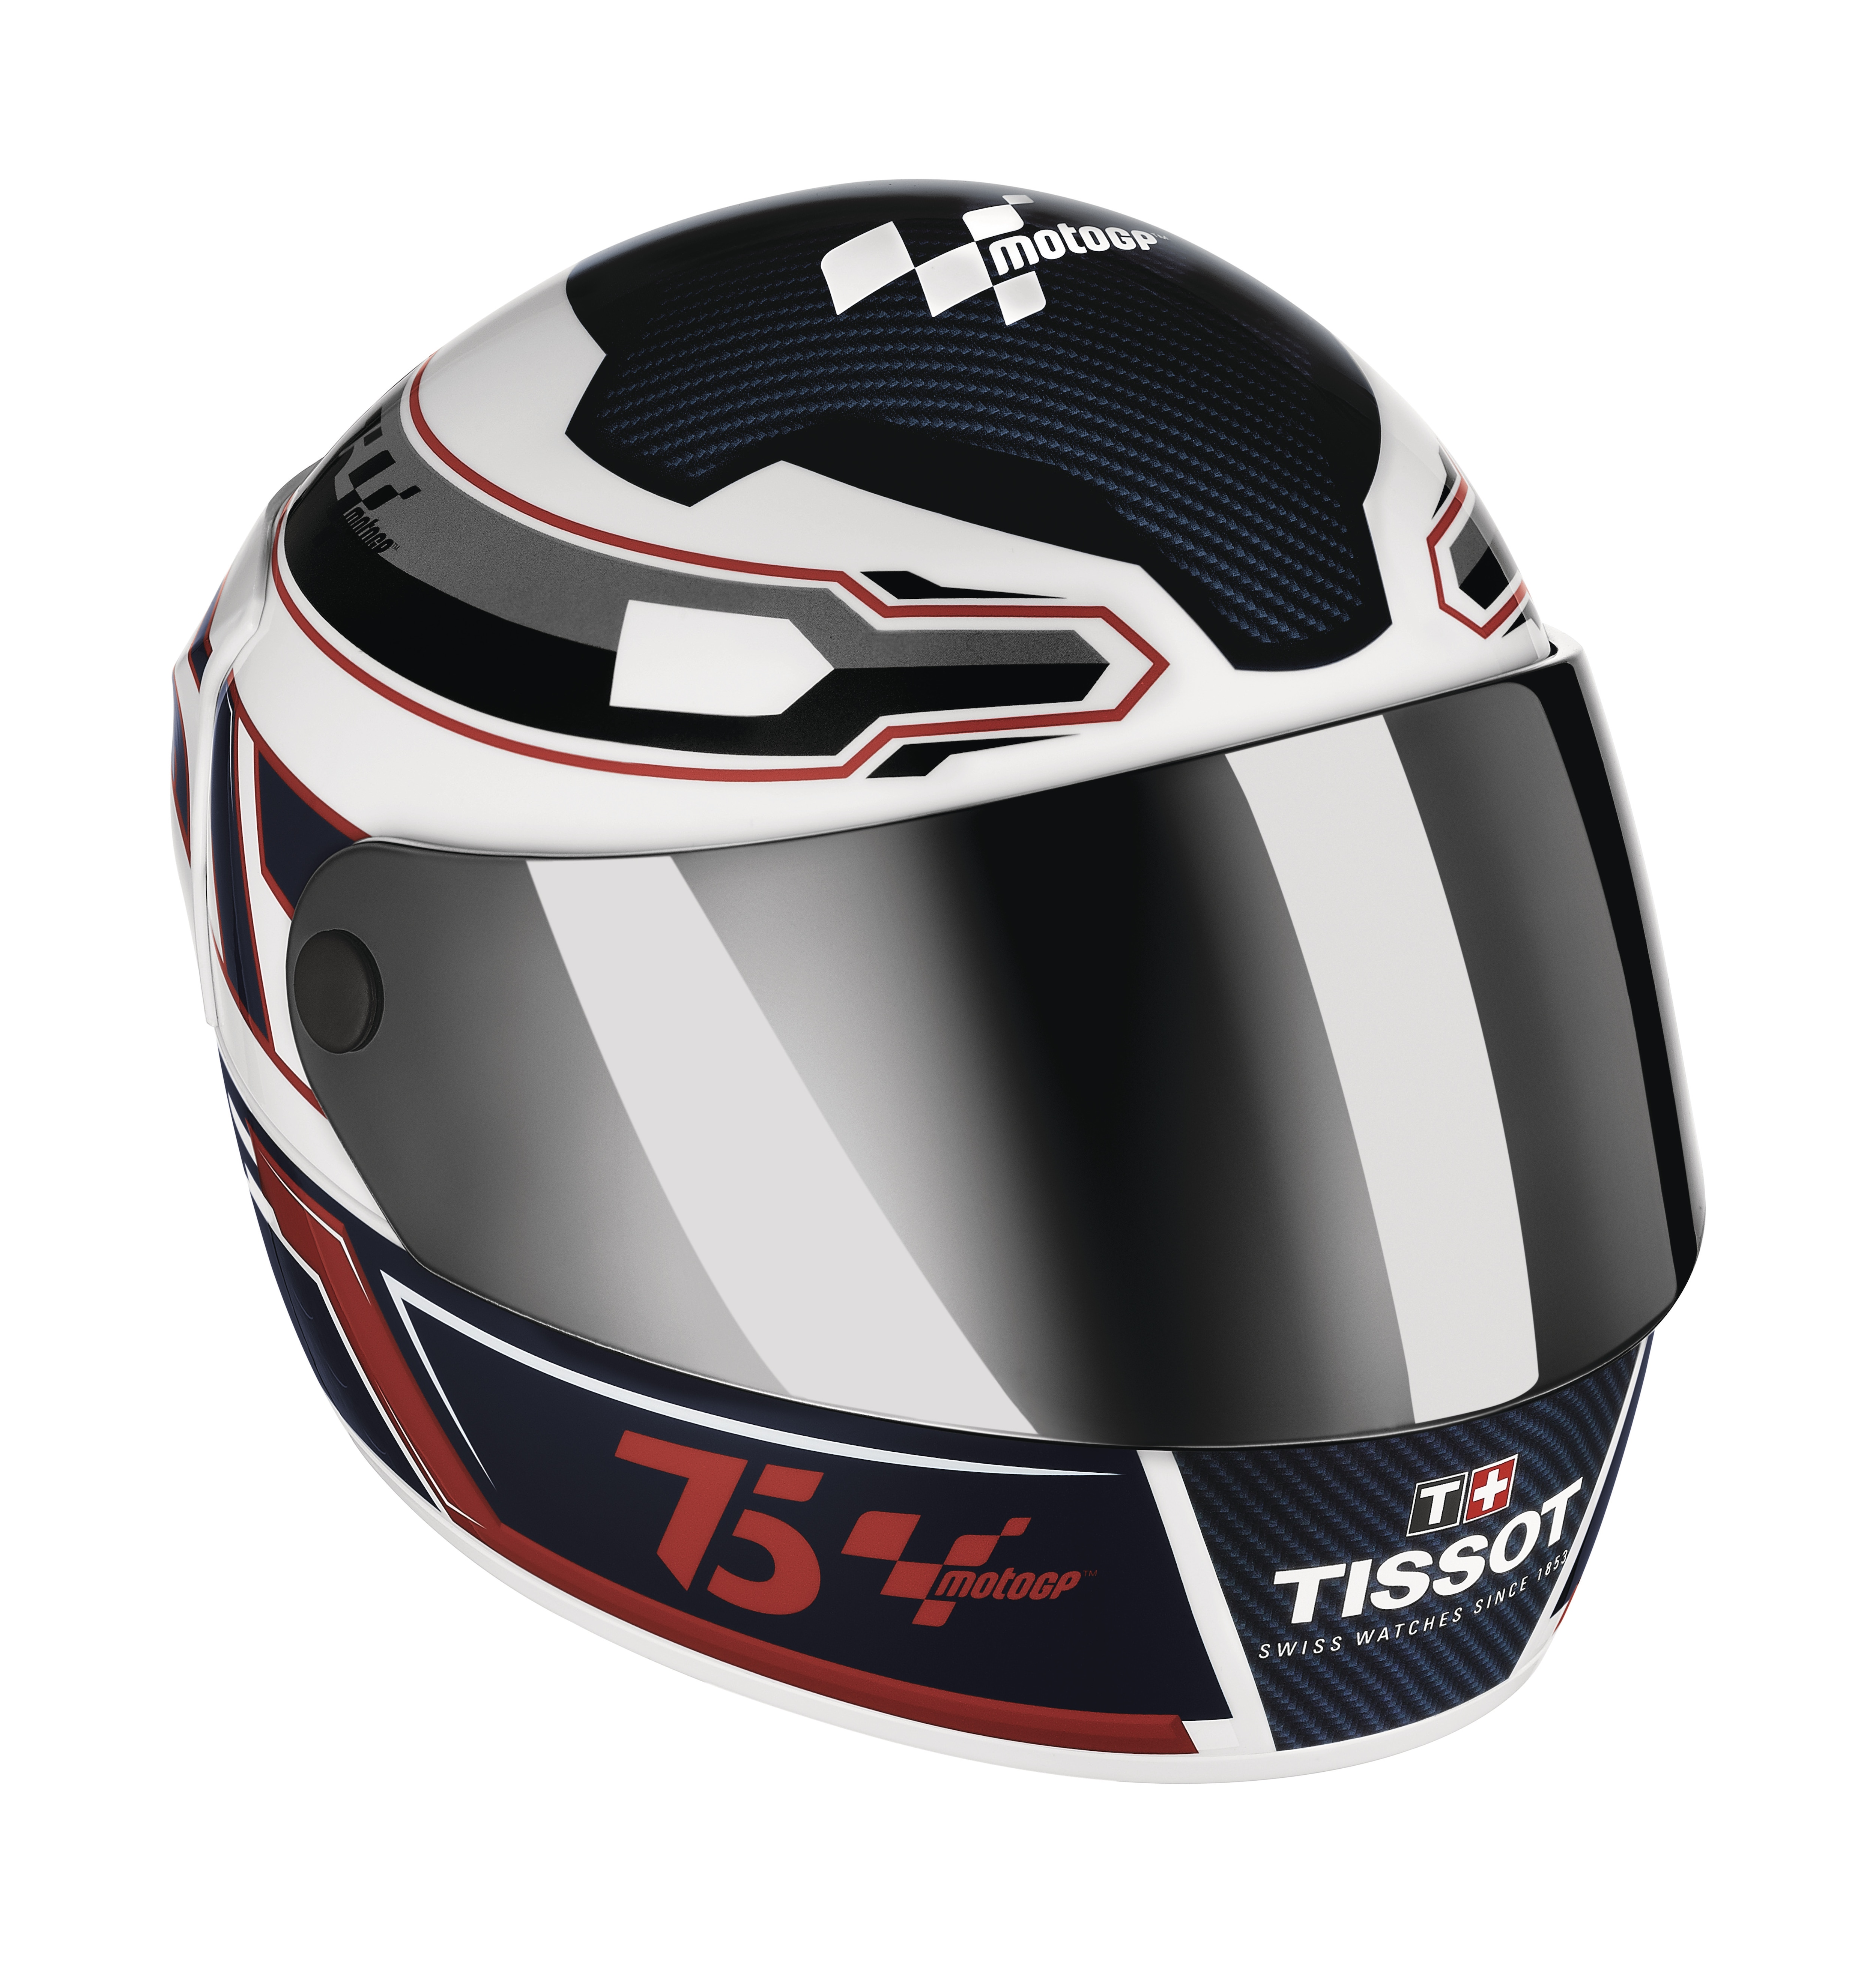 Image of the mini-helmet package when it's closed, with the T-Race MotoGP watch inside